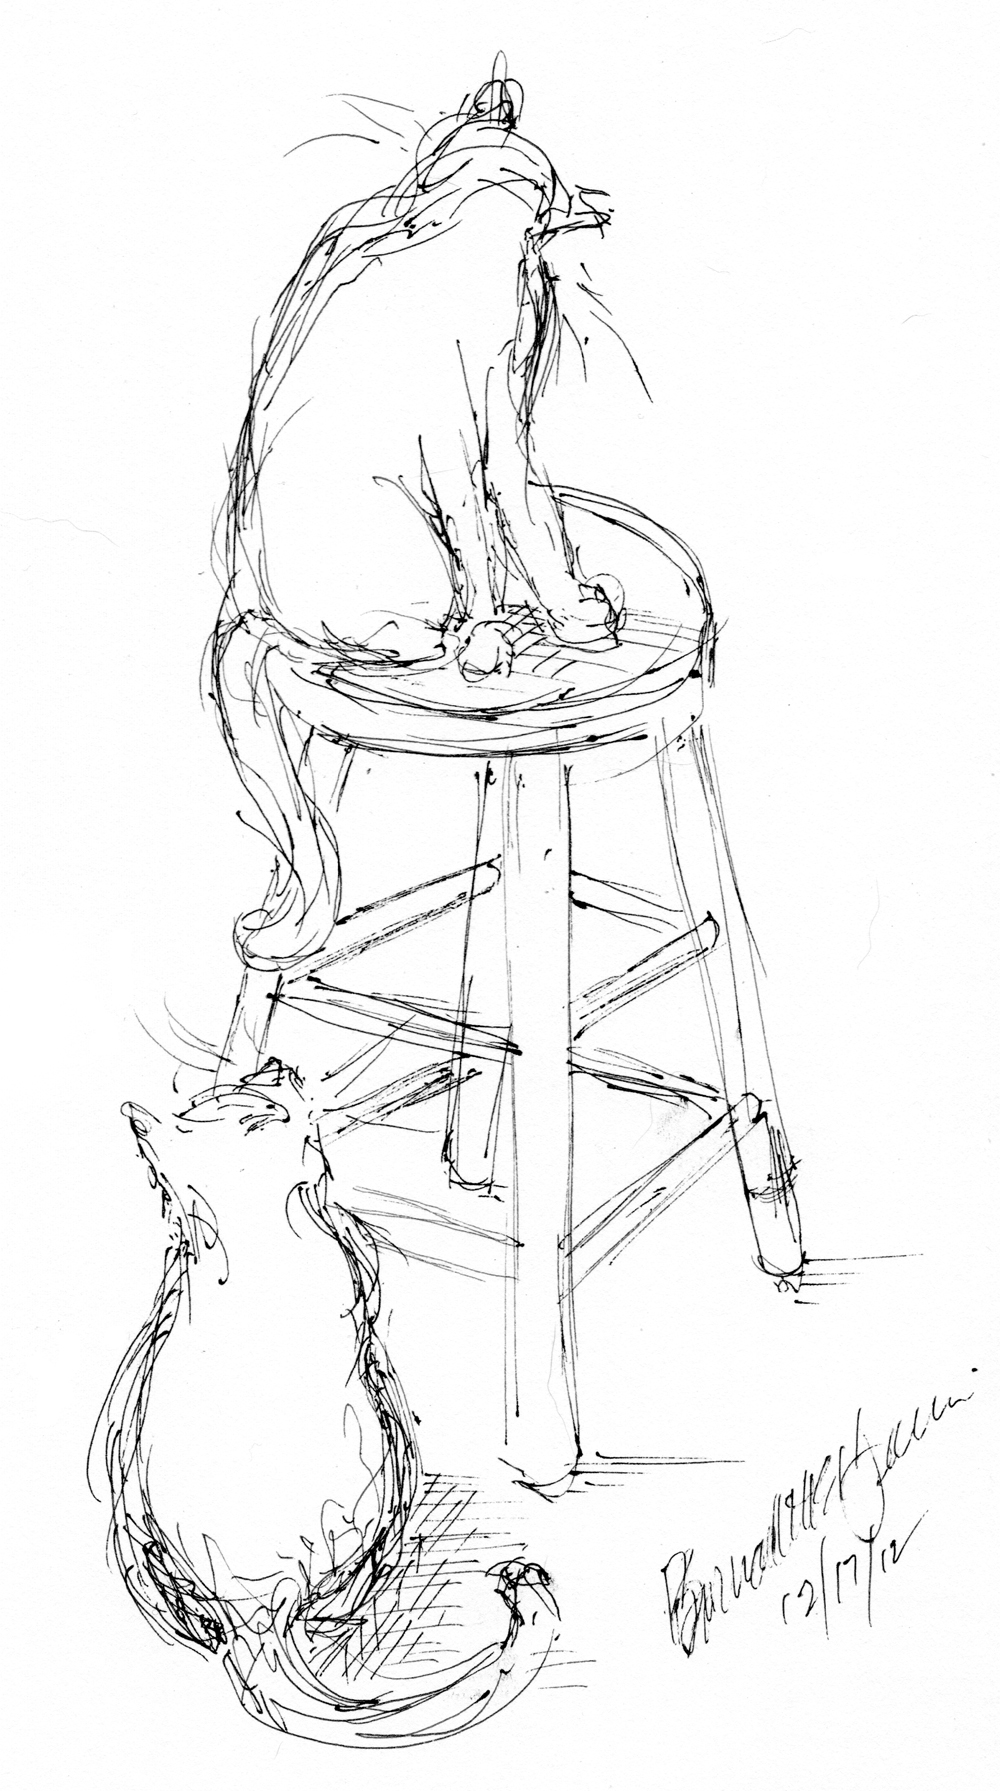 ink sketch of two cats playing